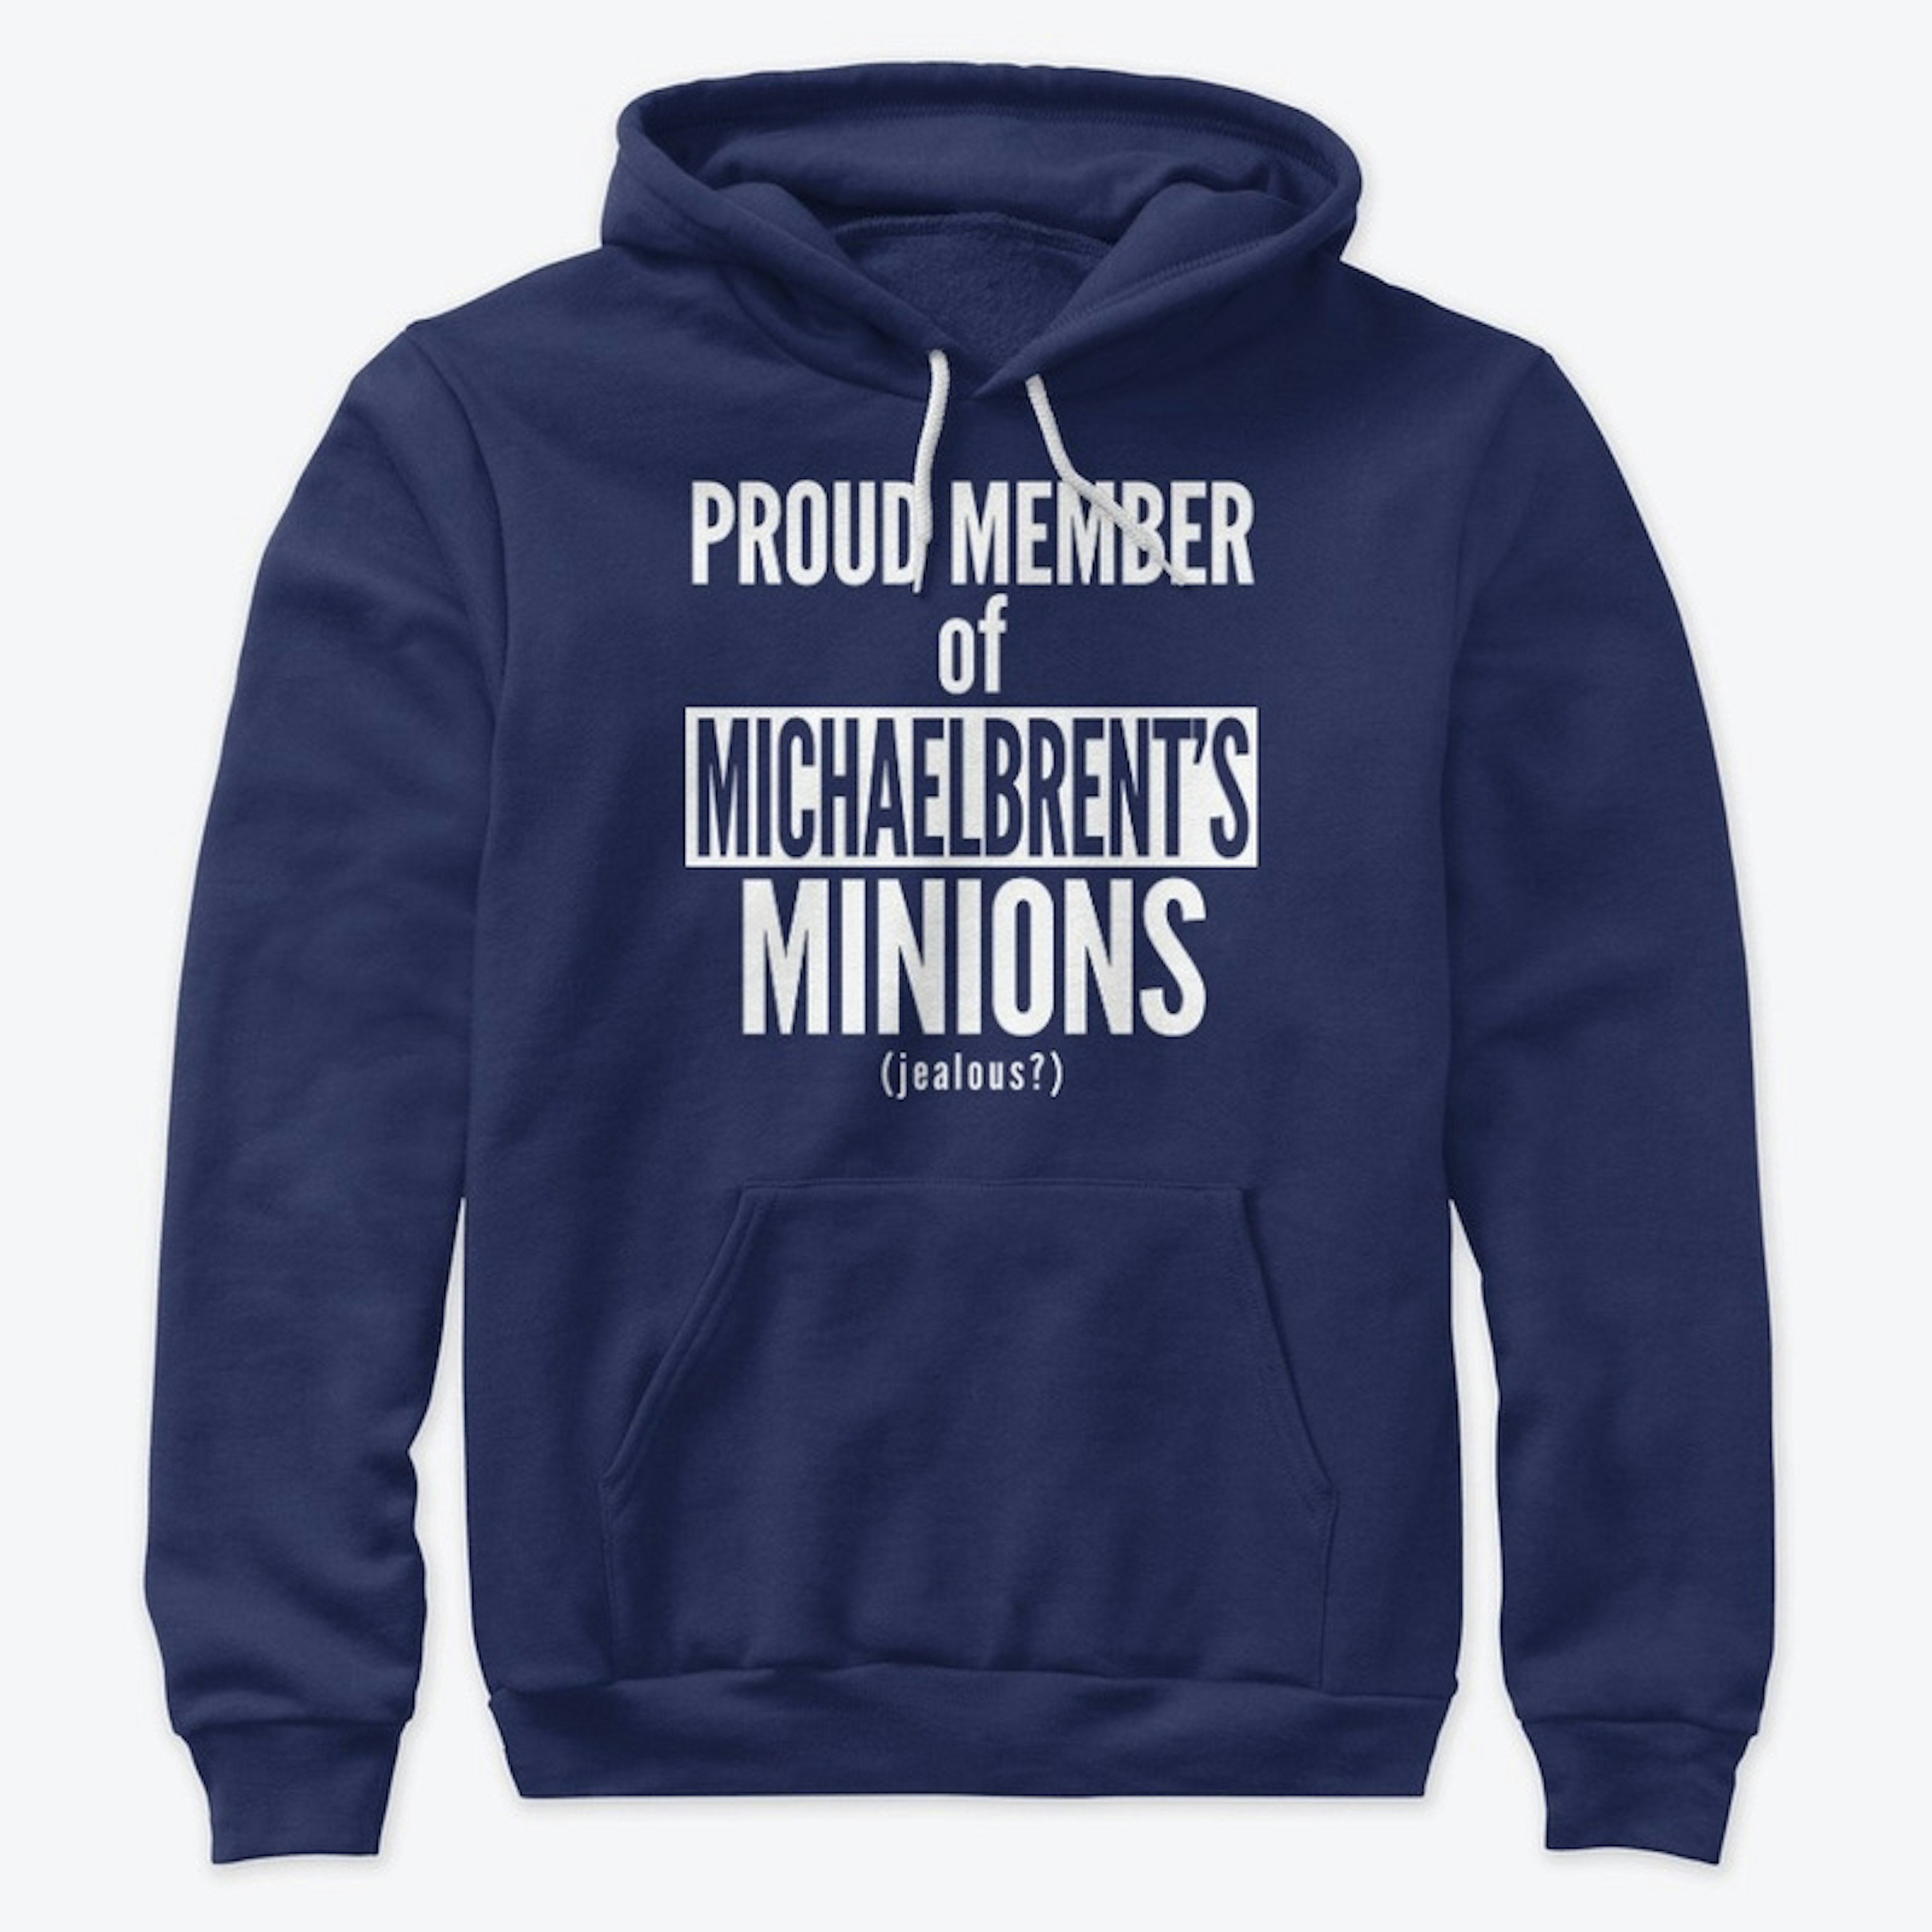 Proud Member of Michaelbrent's Minions